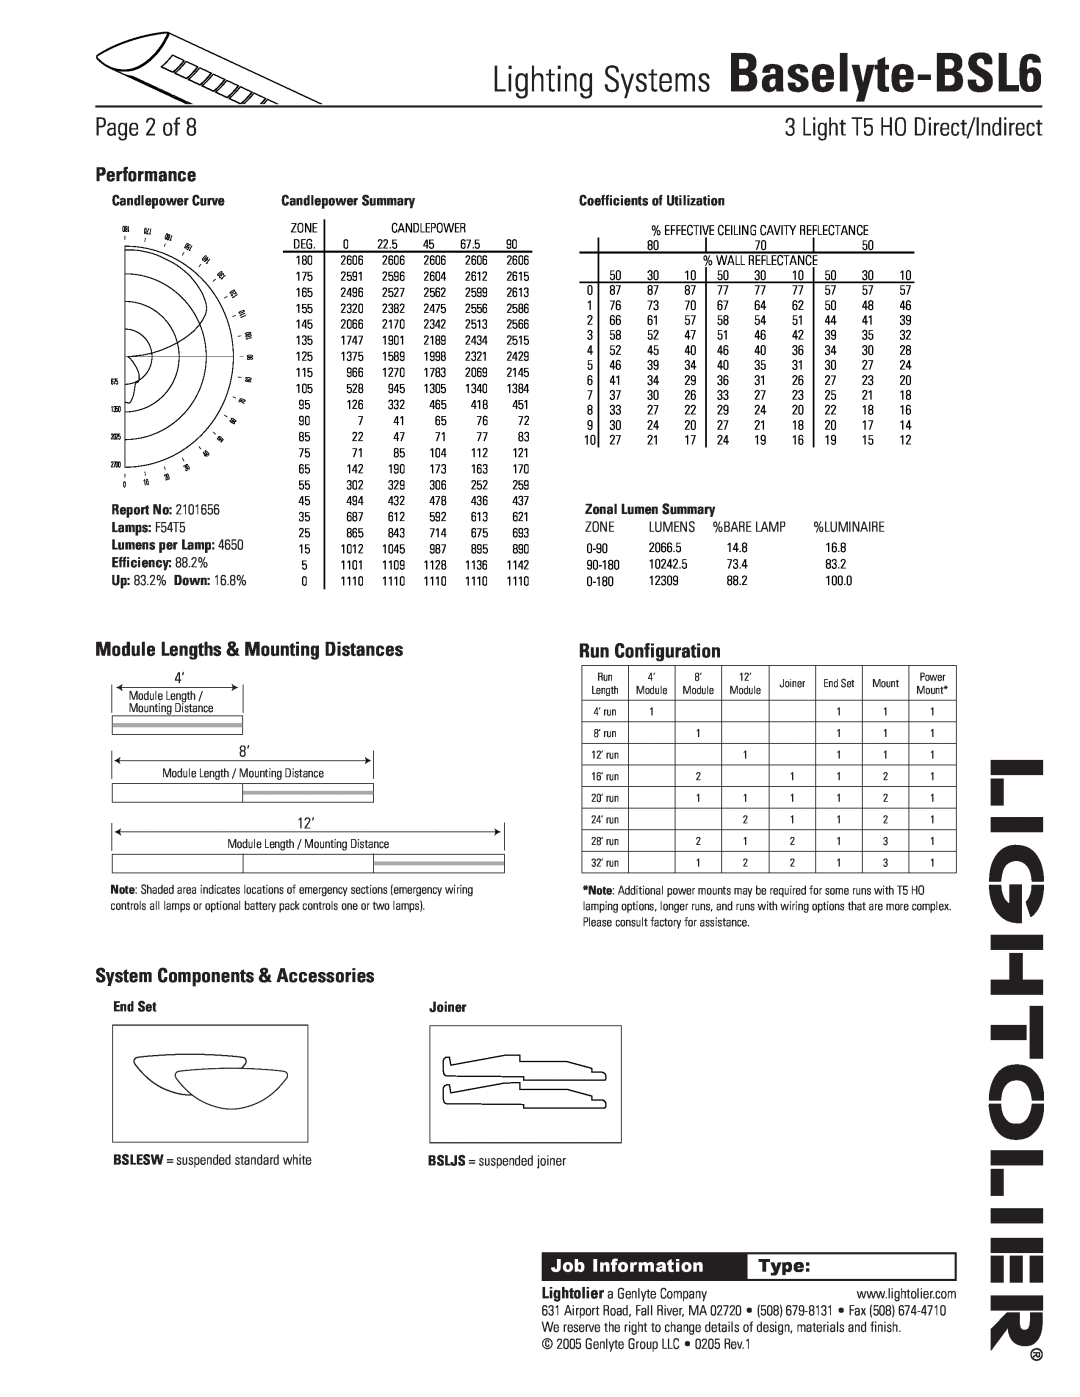 Lightolier Baselyte-BSL6 Page of, Light T5 HO Direct/Indirect, Performance, Module Lengths & Mounting Distances, Type 